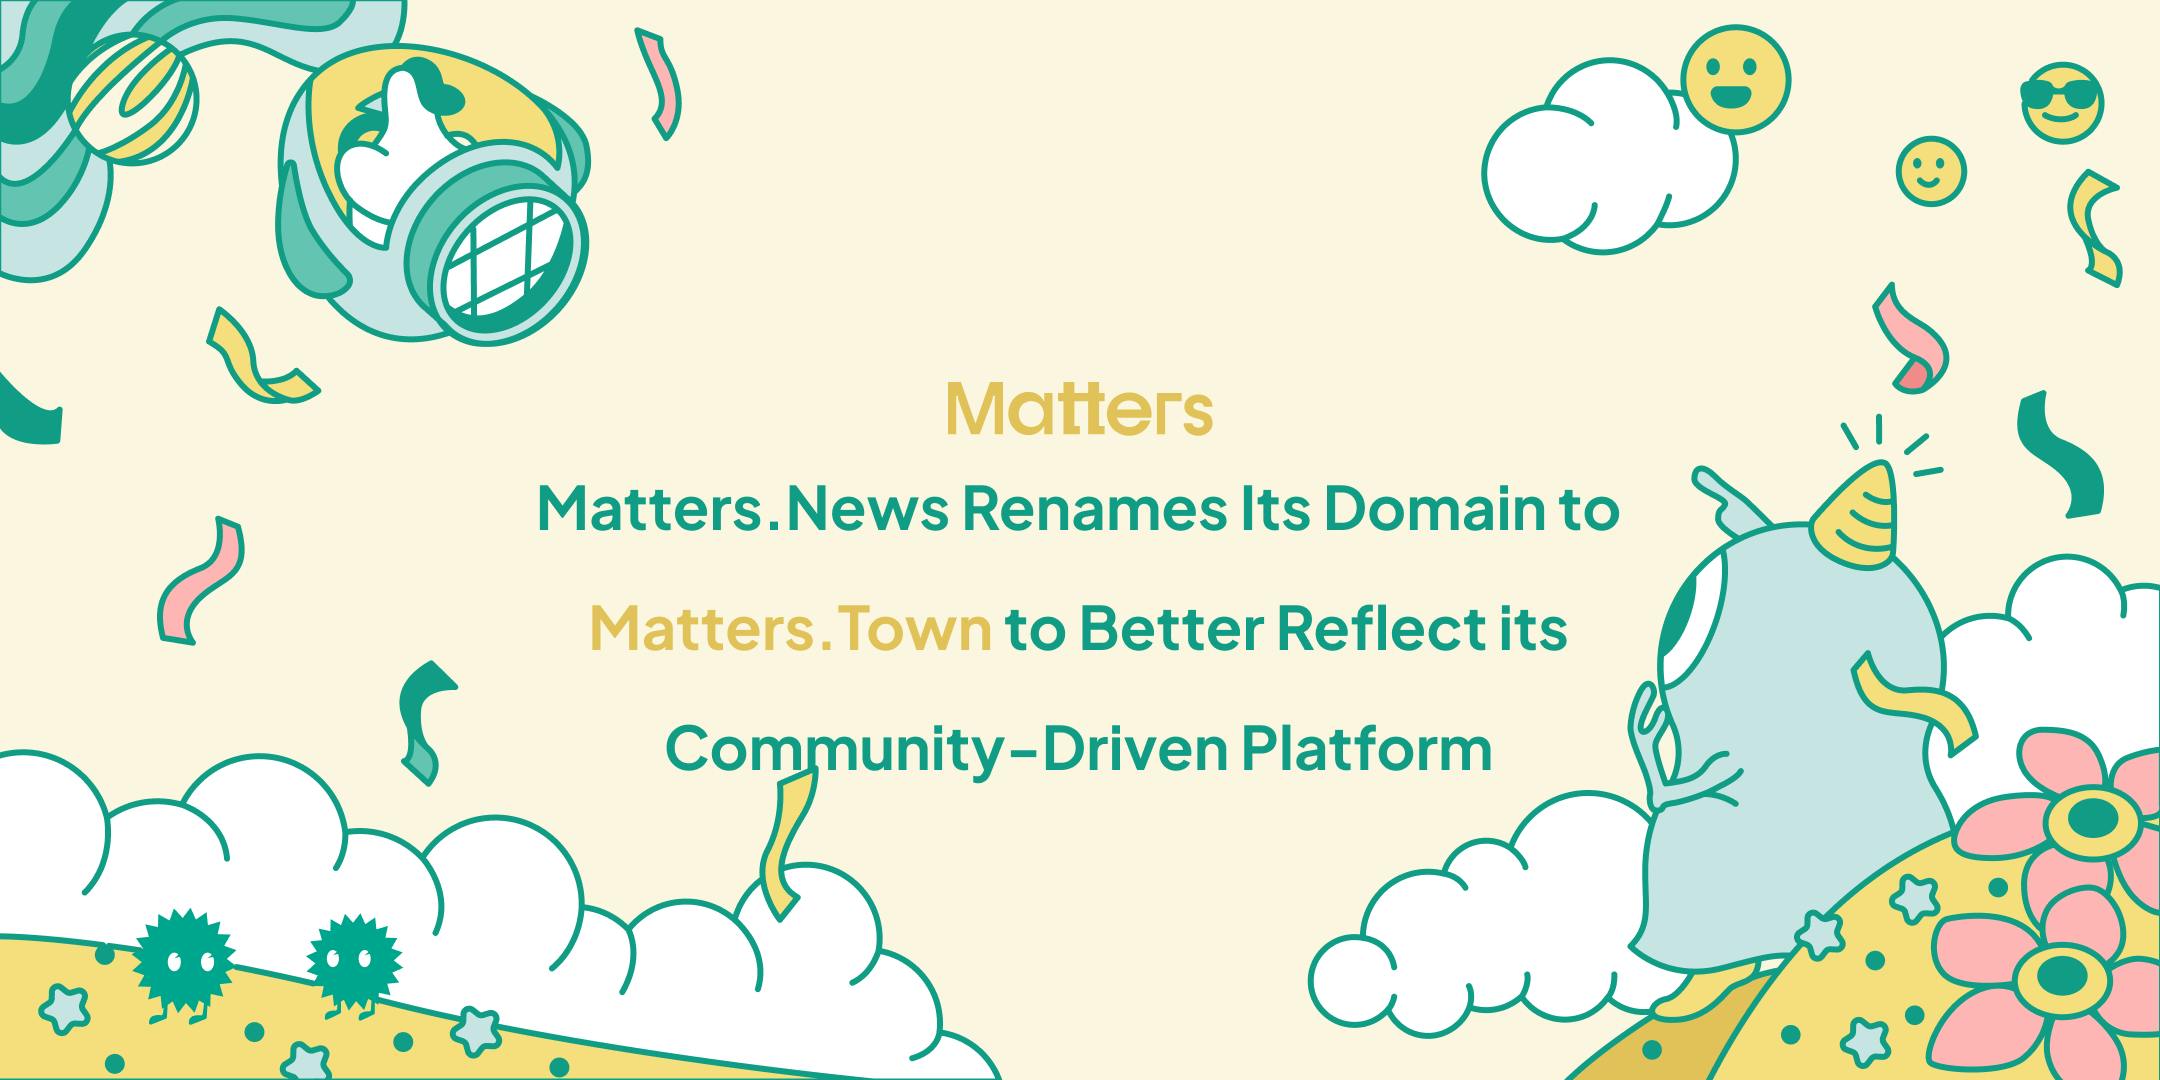 Matters.News Renames Its Domain to Matters.Town to Better Reflect its Community-Driven Platform